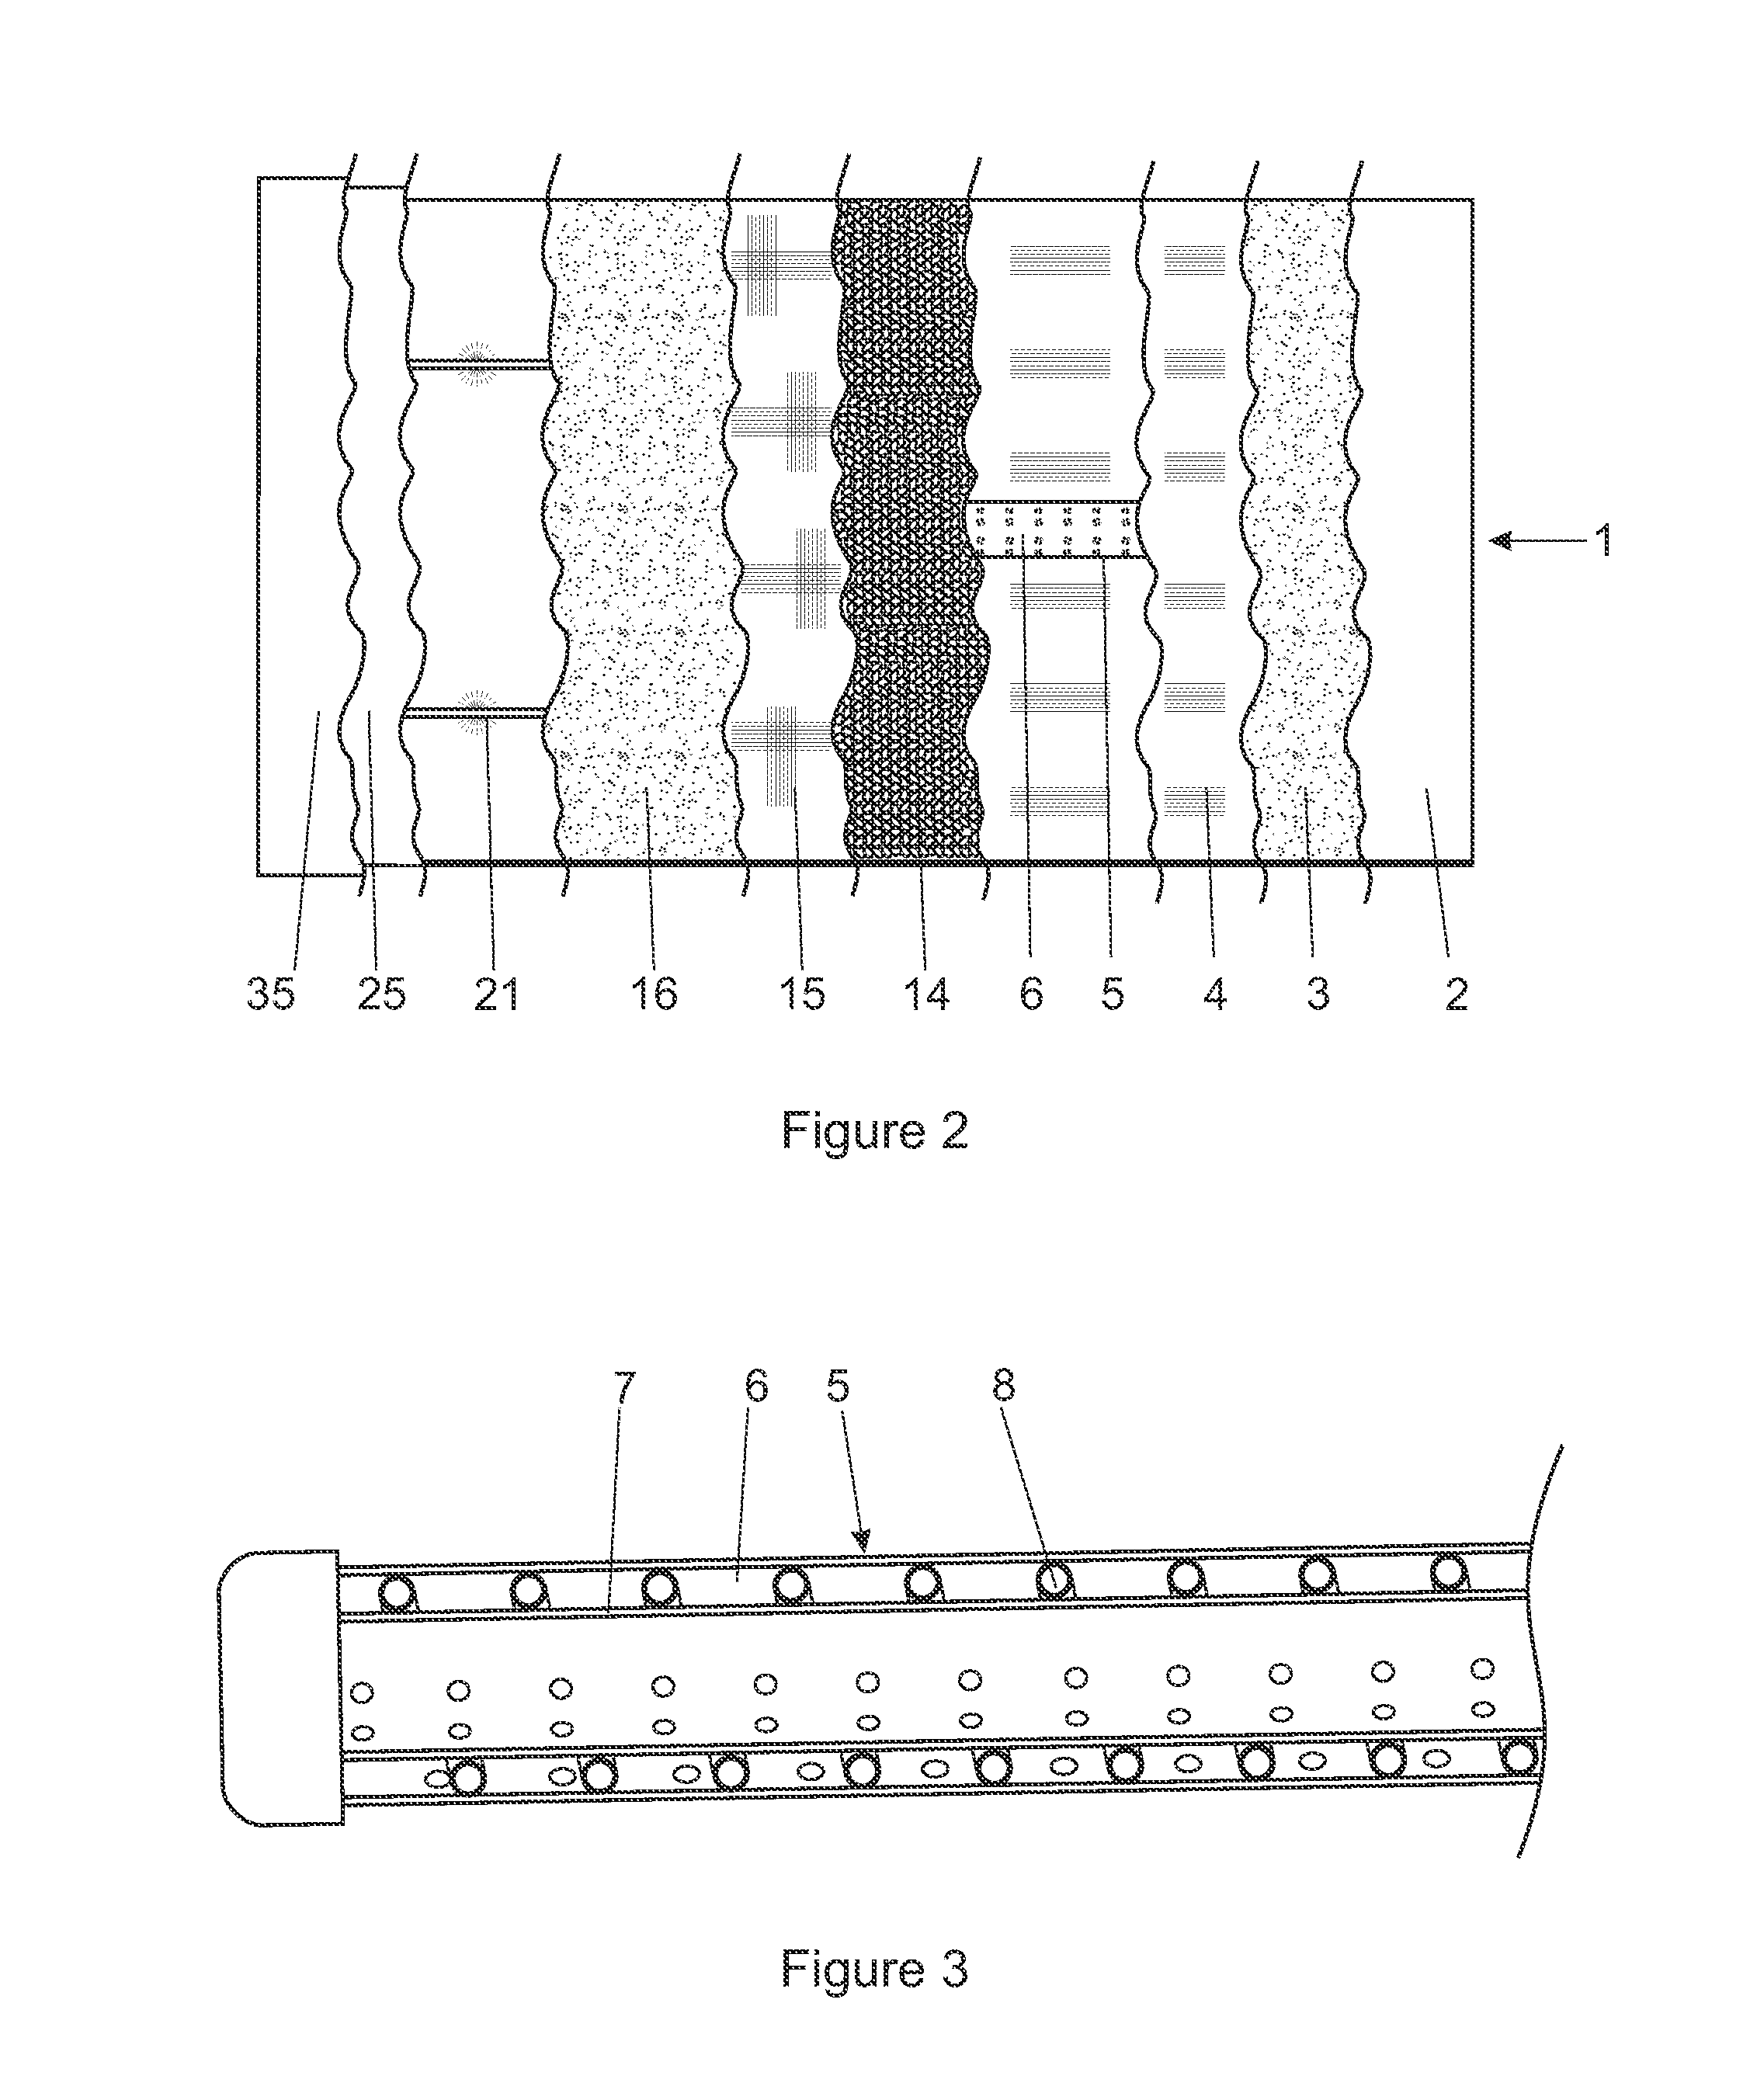 Apparatus and Method for Conducting Microbiological Processes